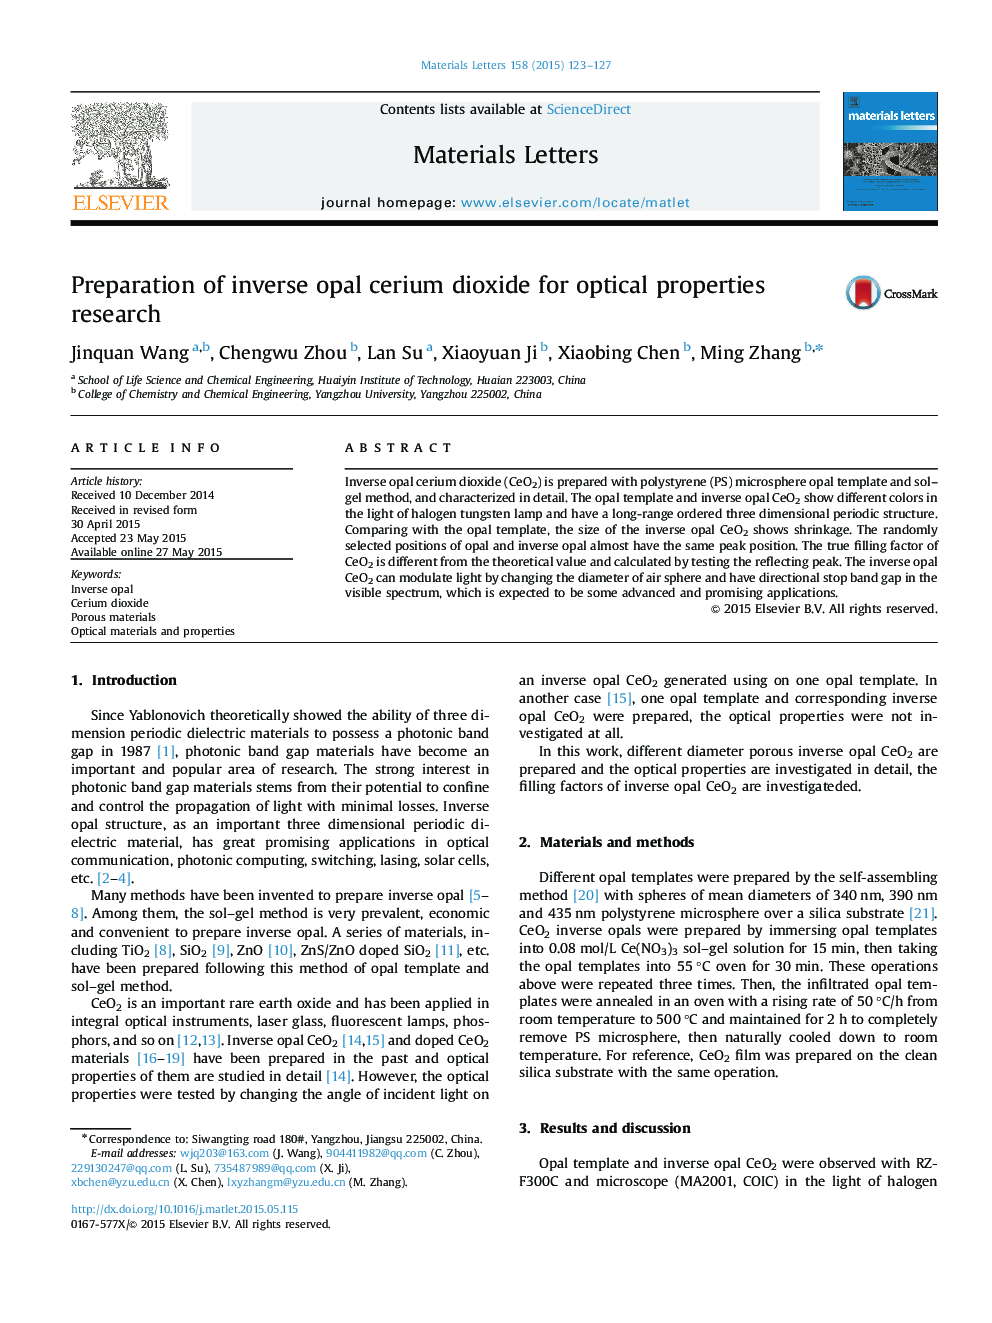 Preparation of inverse opal cerium dioxide for optical properties research